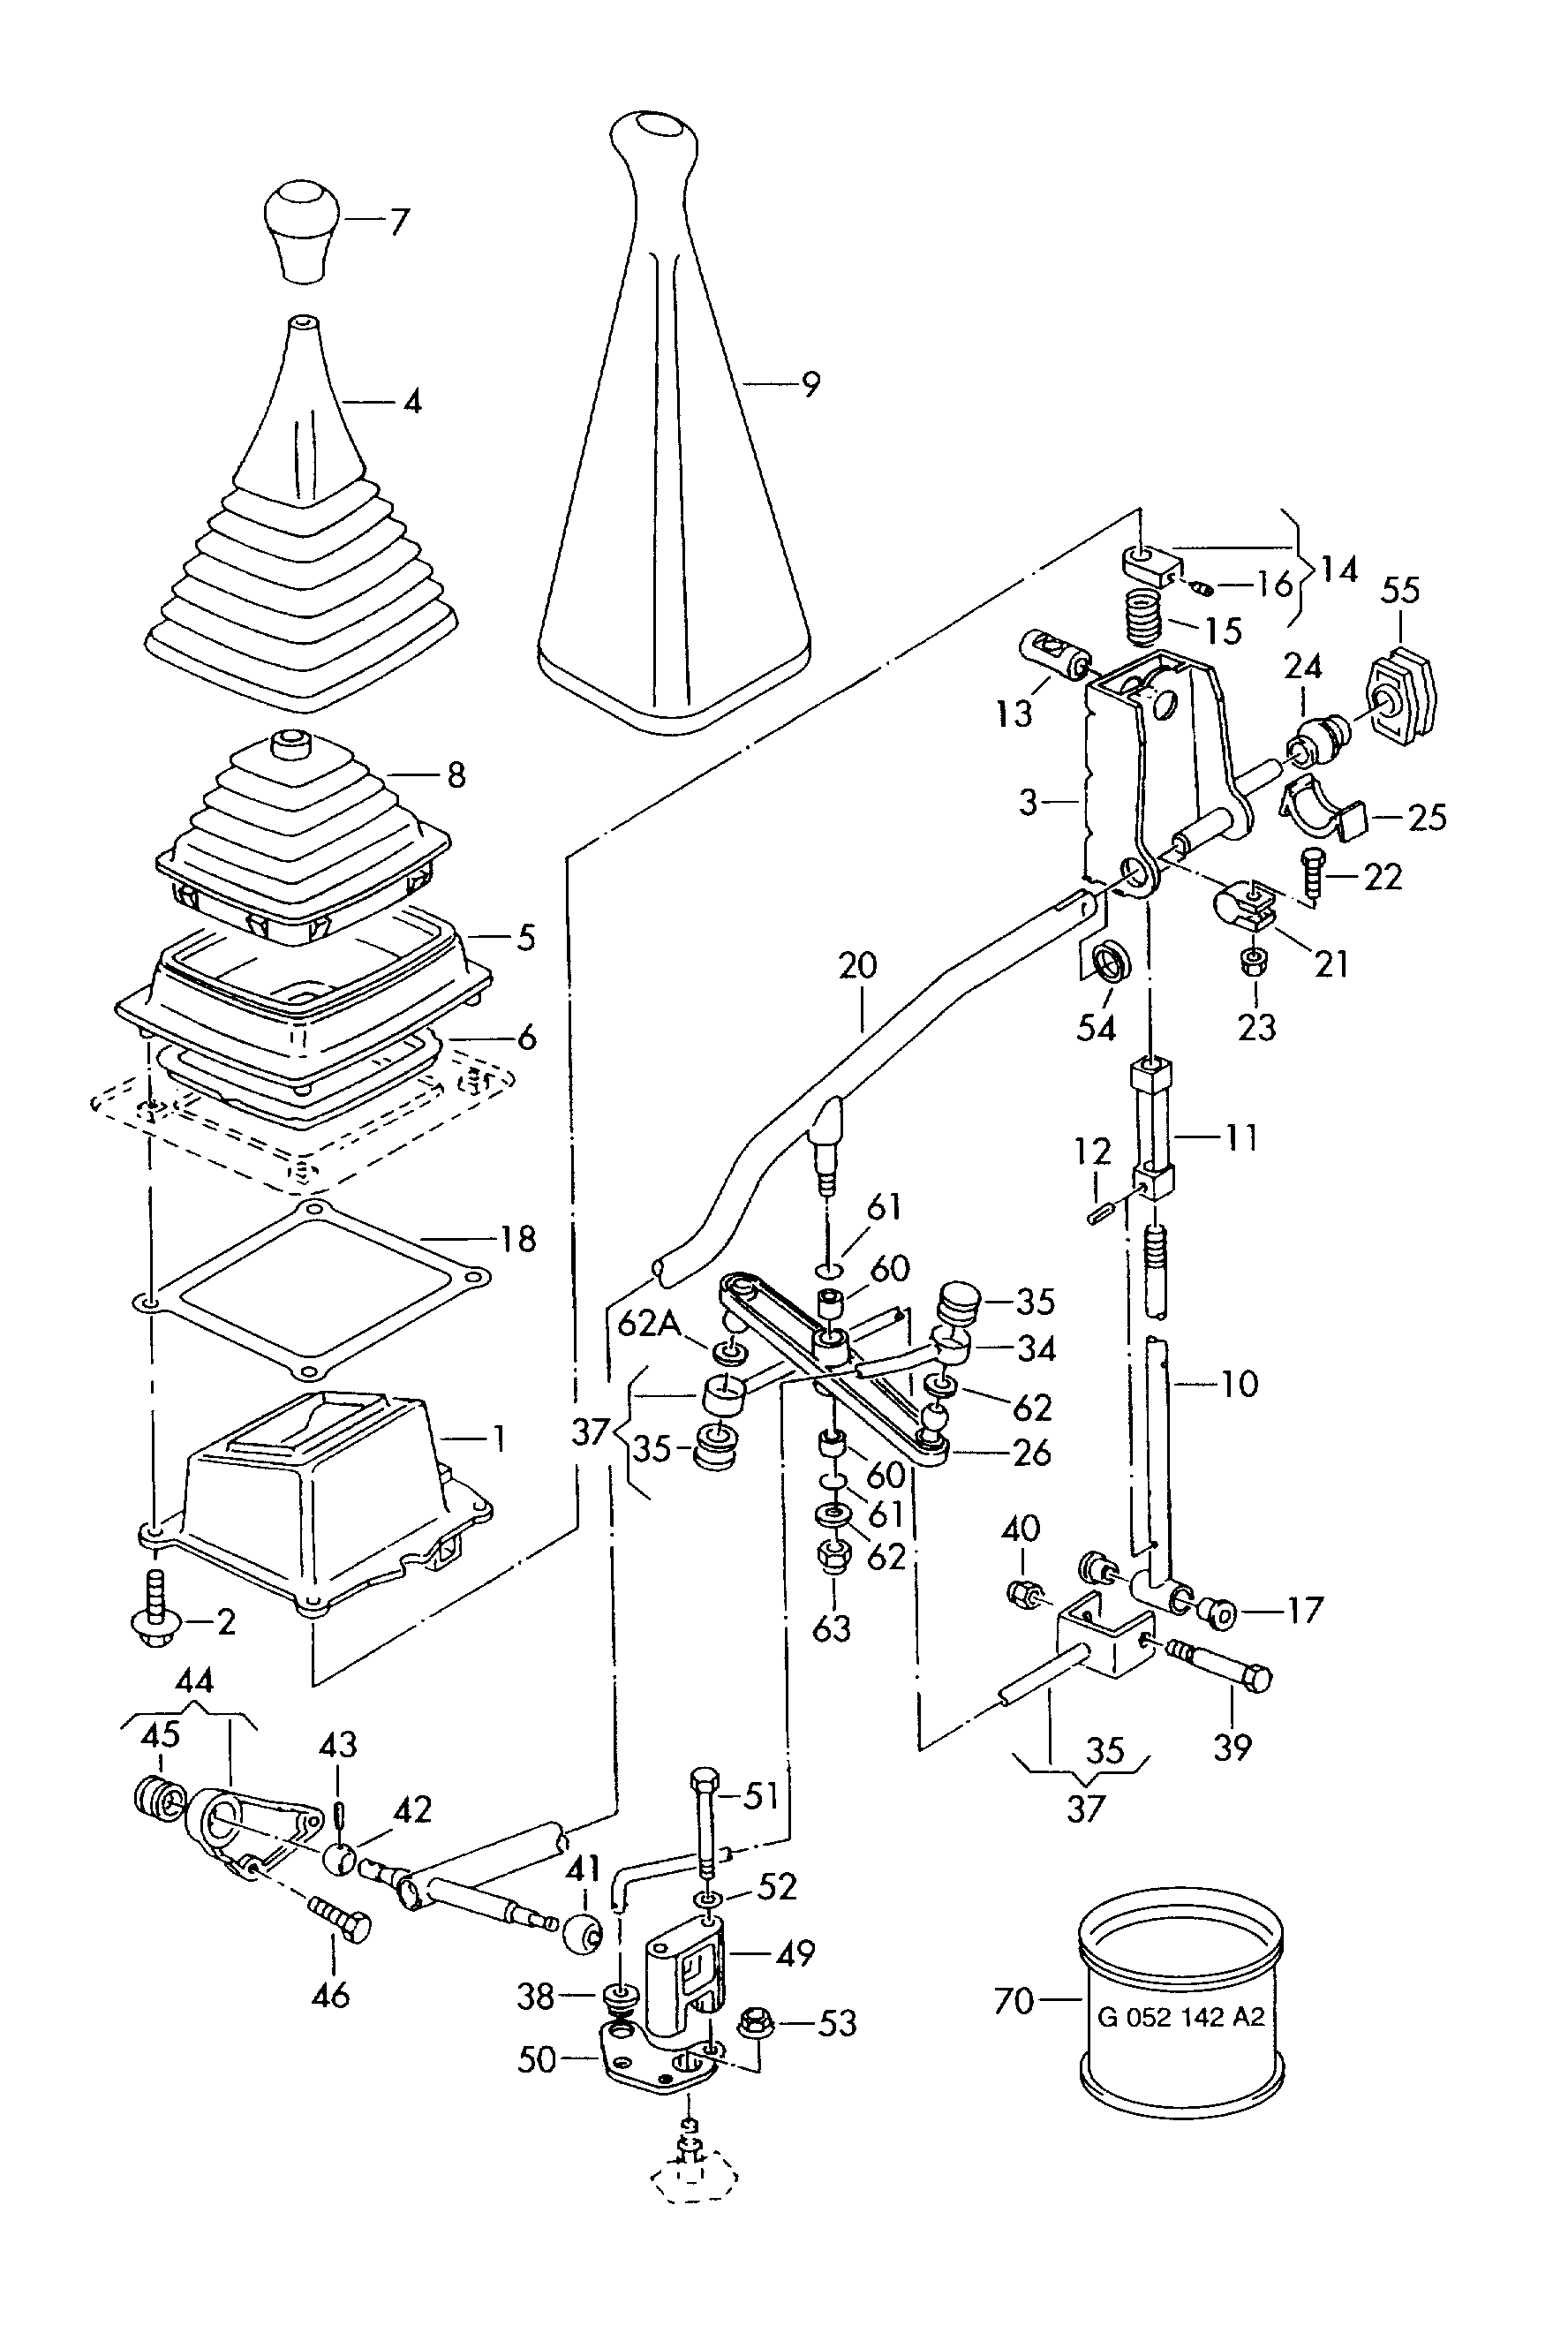 Selector mechanism  - Transporter syncro - trsy